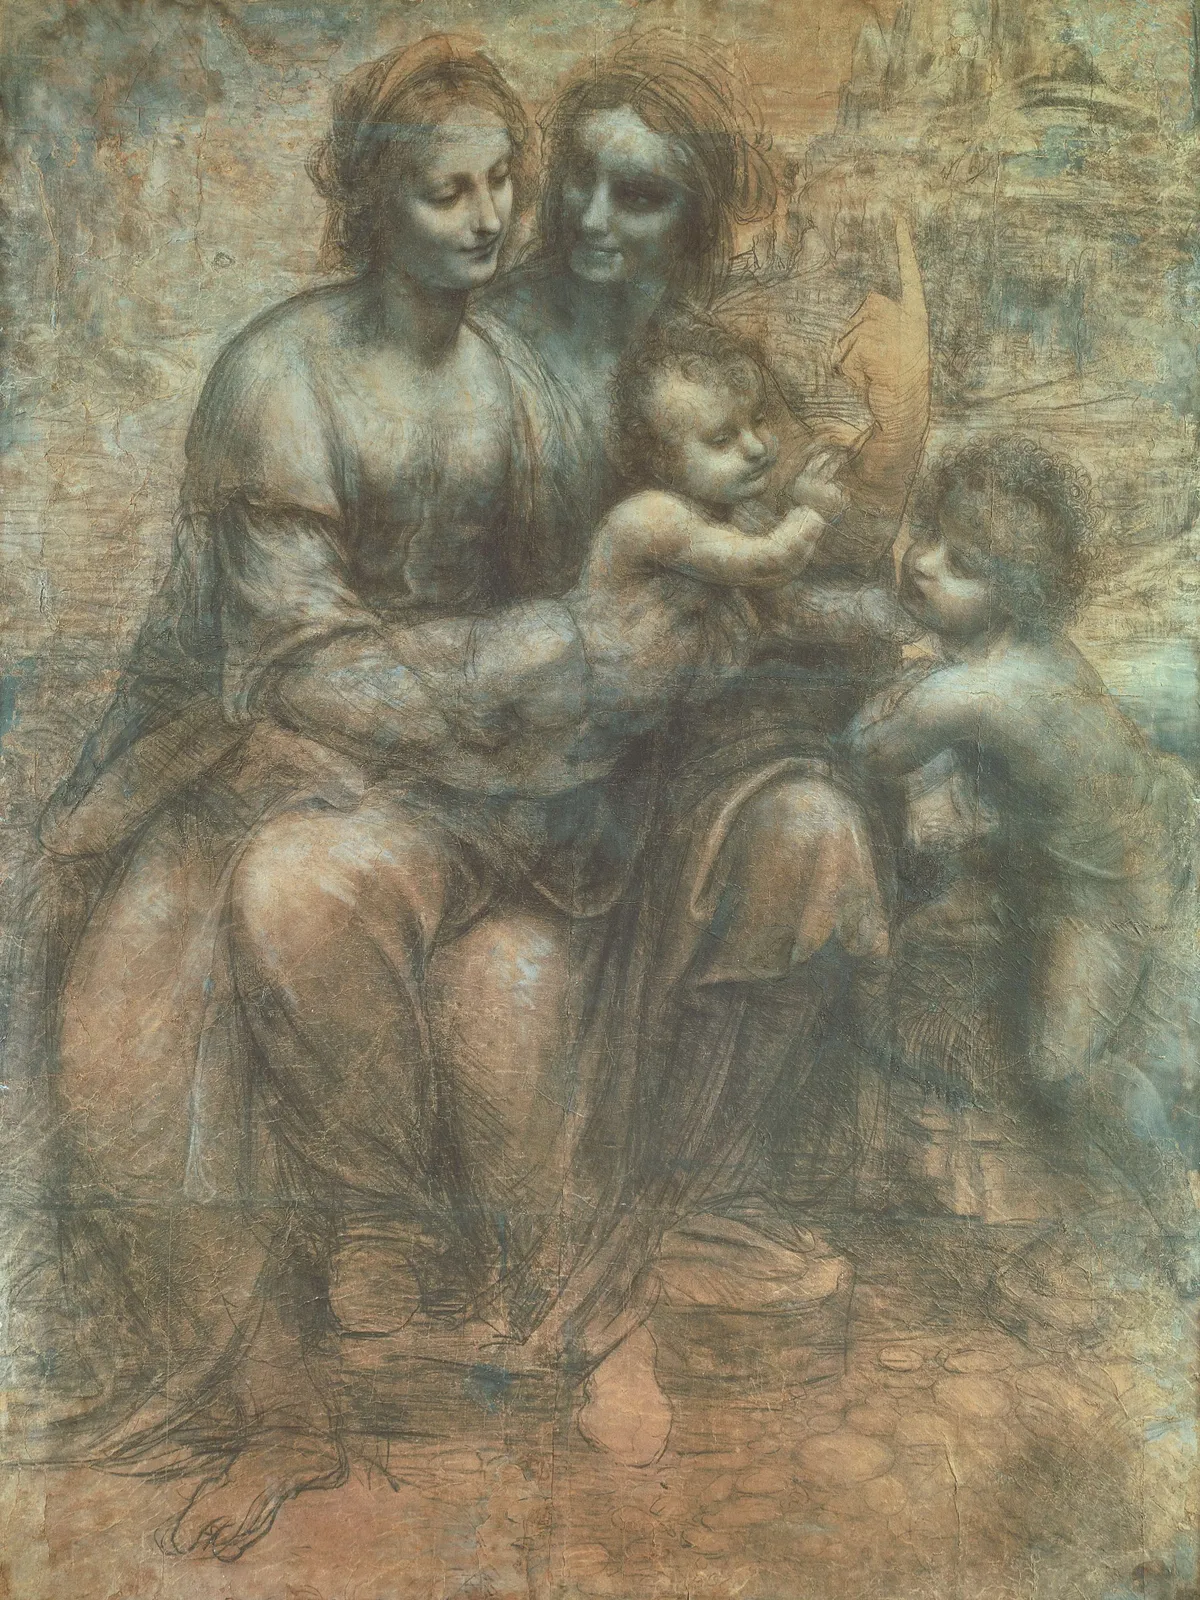 ITALY - CIRCA 2002: London, National Gallery The Virgin and Child with St Anne and St John the Baptist or Burlington House Cartoon, 1499-1500, by Leonardo da Vinci (1452-1519), drawing in black chalk, white lead and shade on paper, 141.5x104.6 cm. (Photo by DeAgostini/Getty Images)